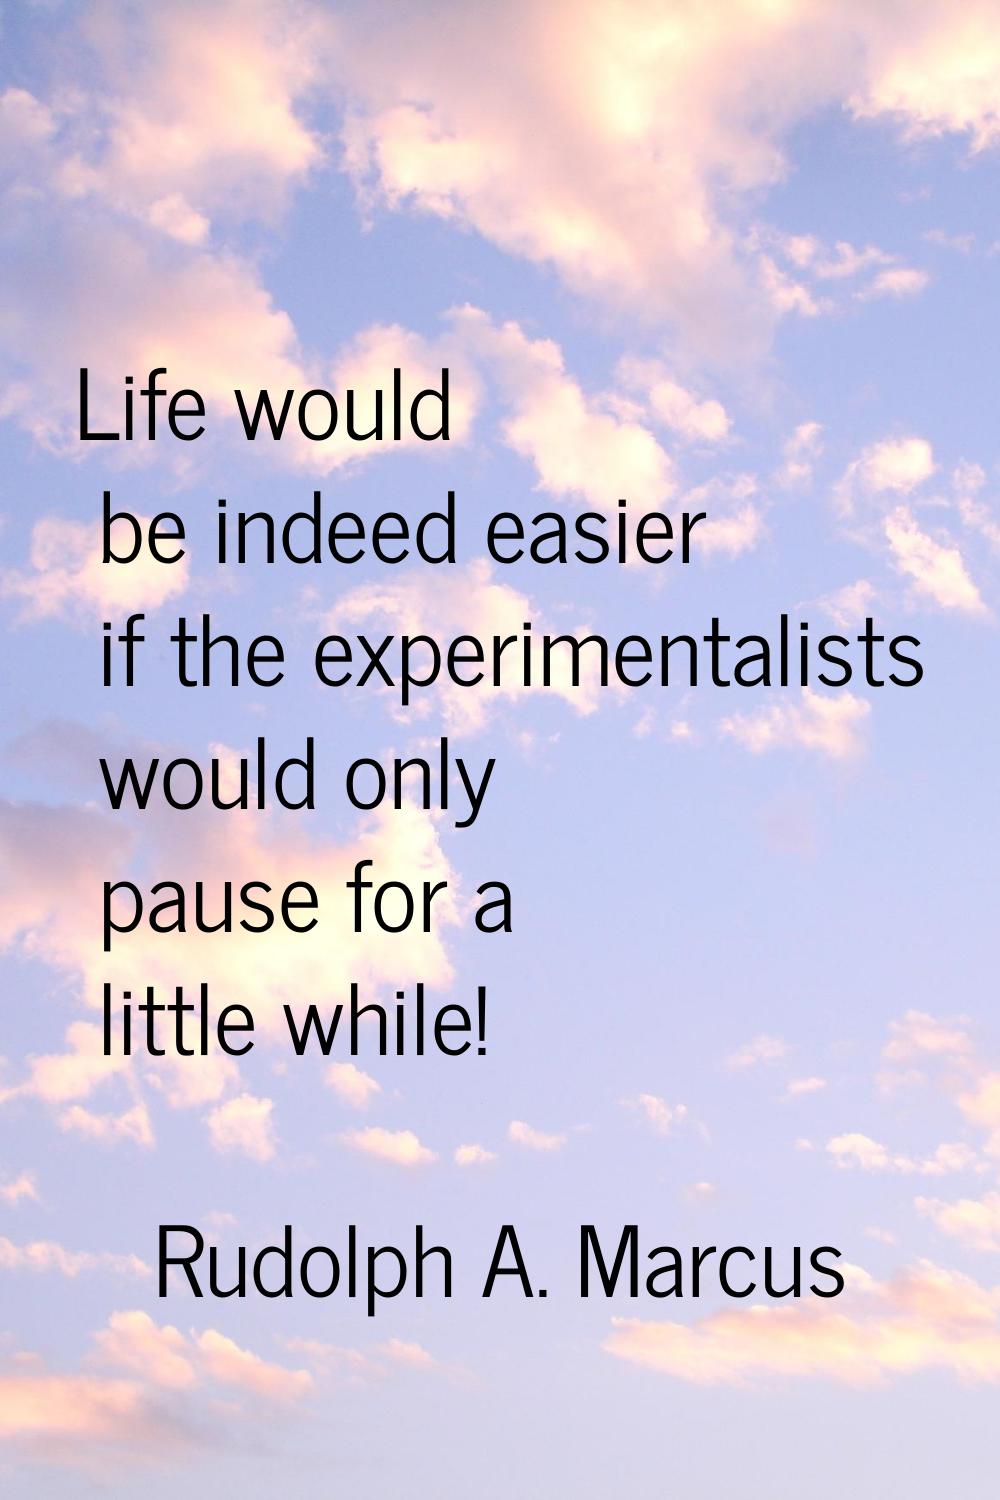 Life would be indeed easier if the experimentalists would only pause for a little while!